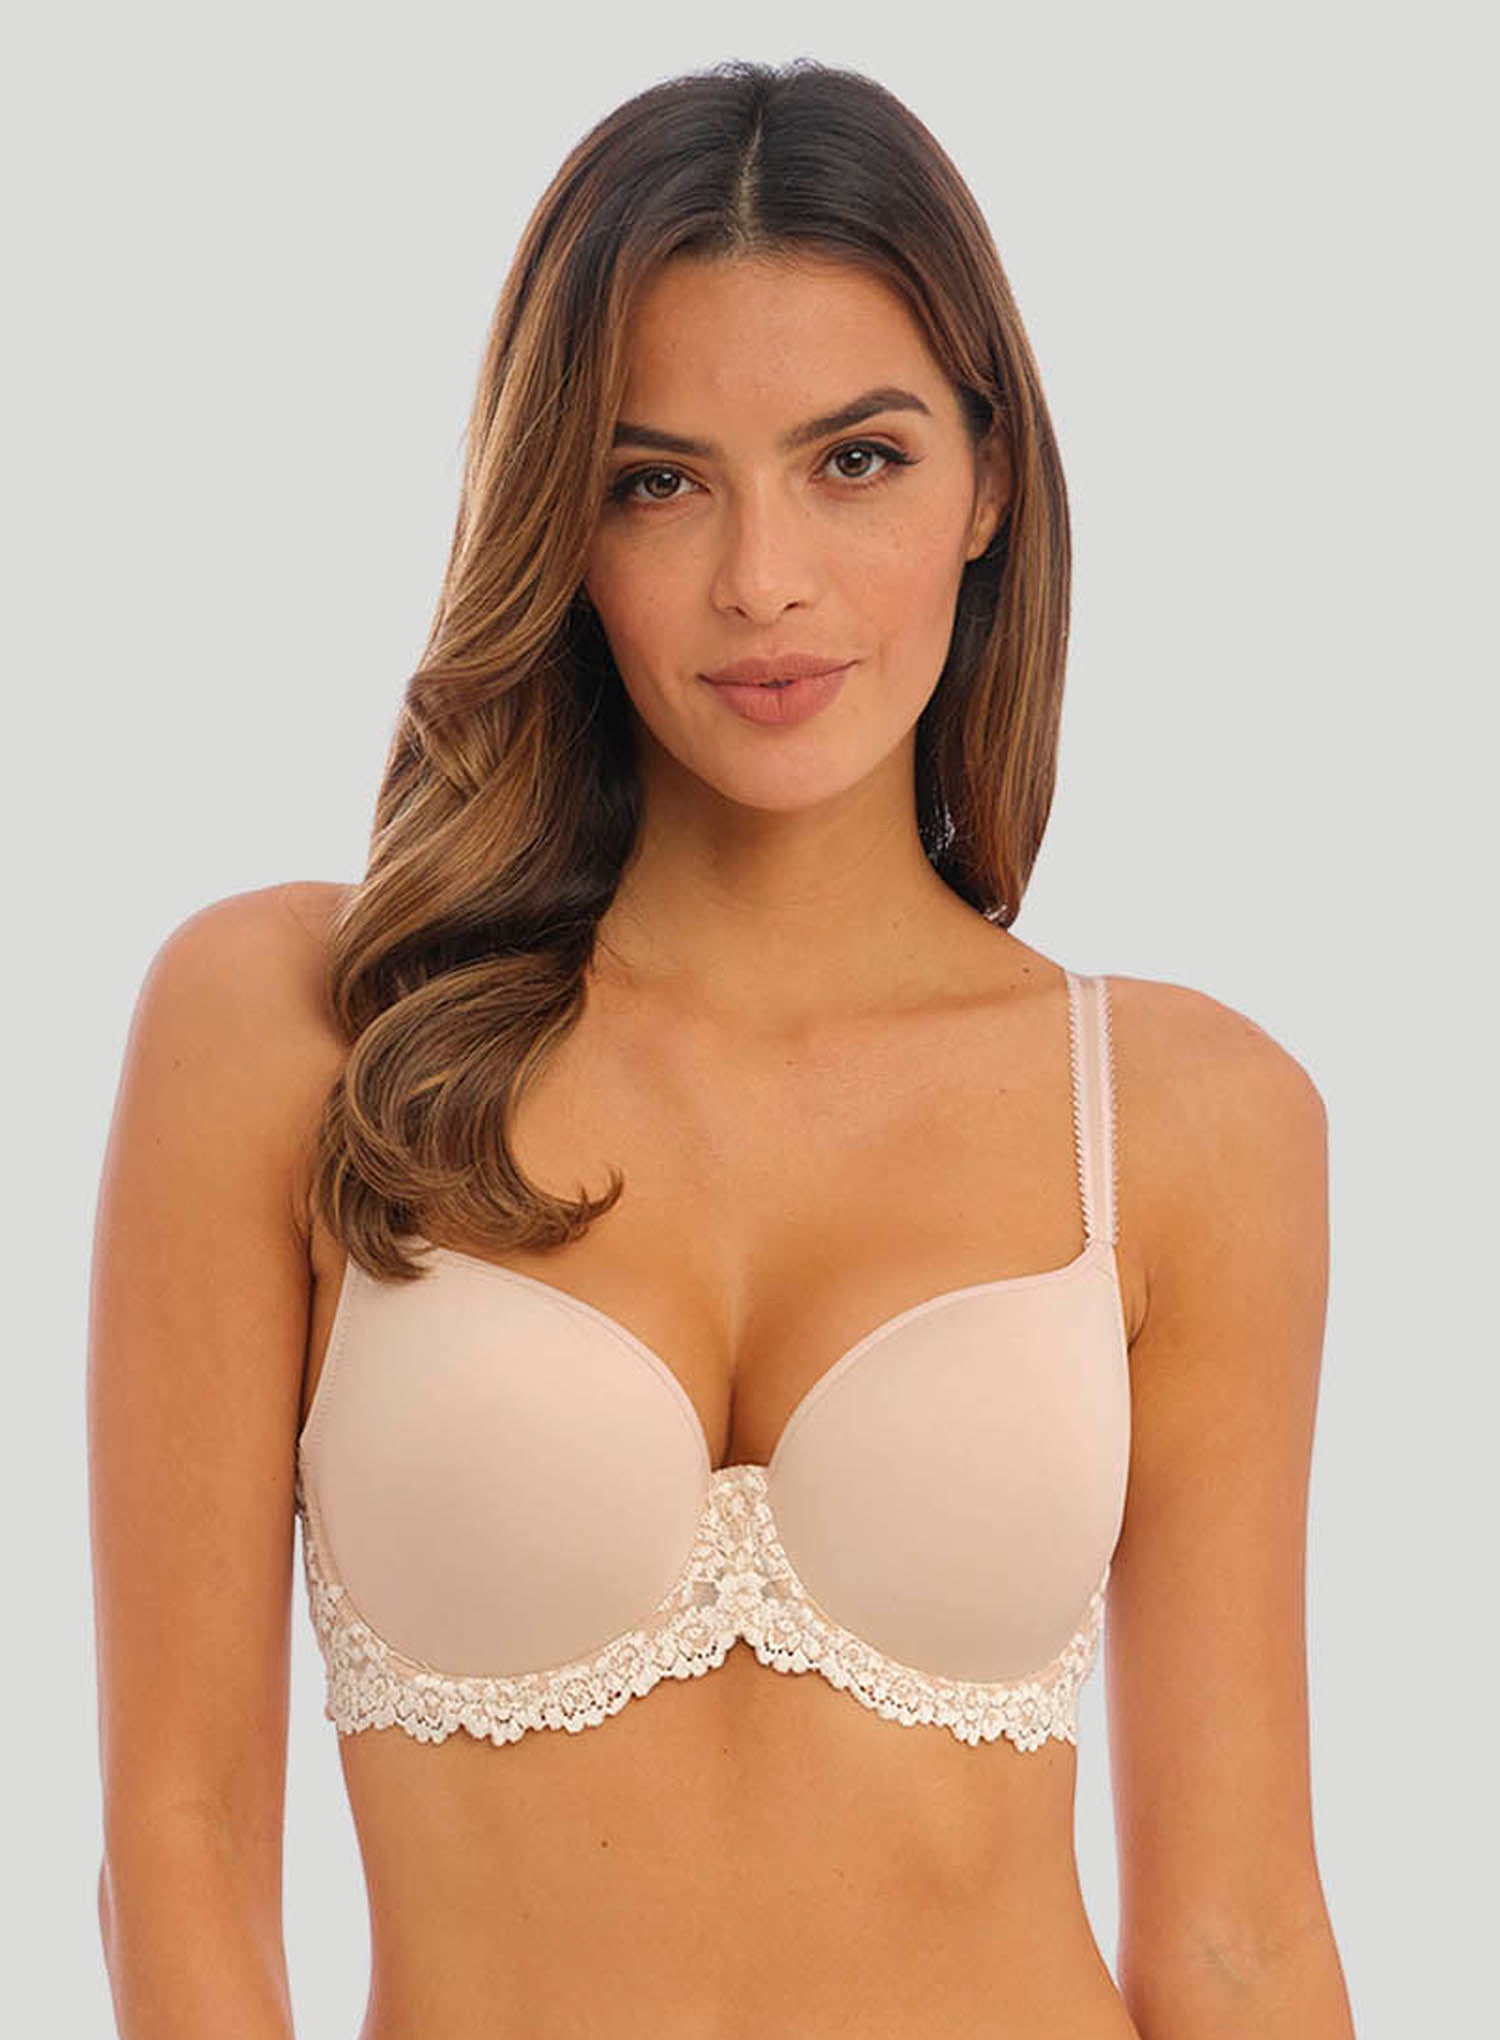 Wacoal 85276 Awareness Soft Cup Bra 36 C Natural Nude 36c for sale online